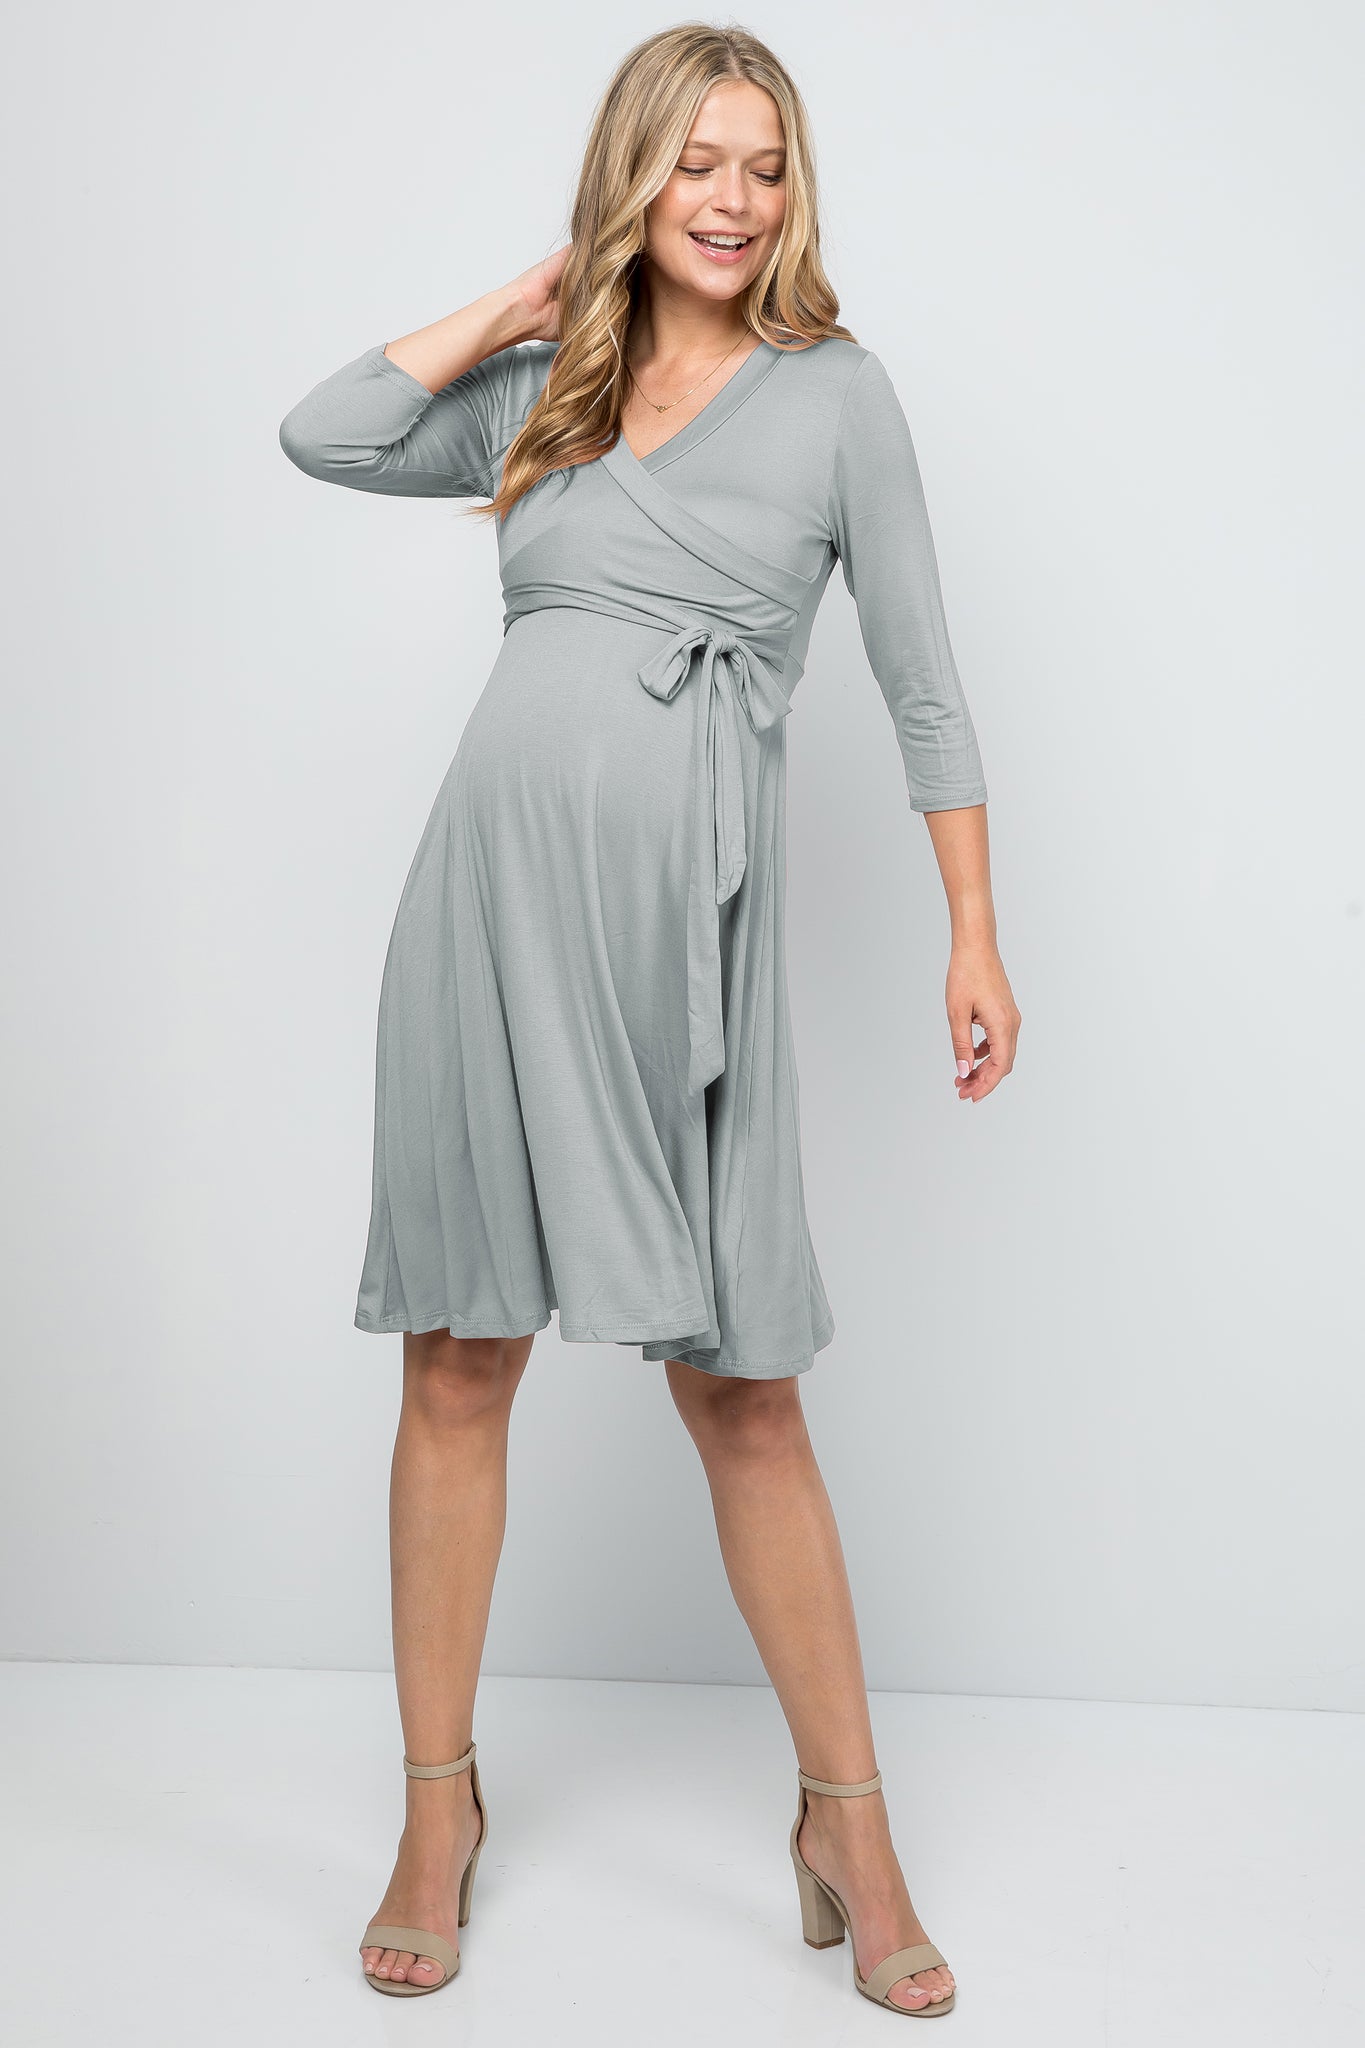 Isabel Maternity Solid Gray Casual Dress Size S (Maternity) - 34